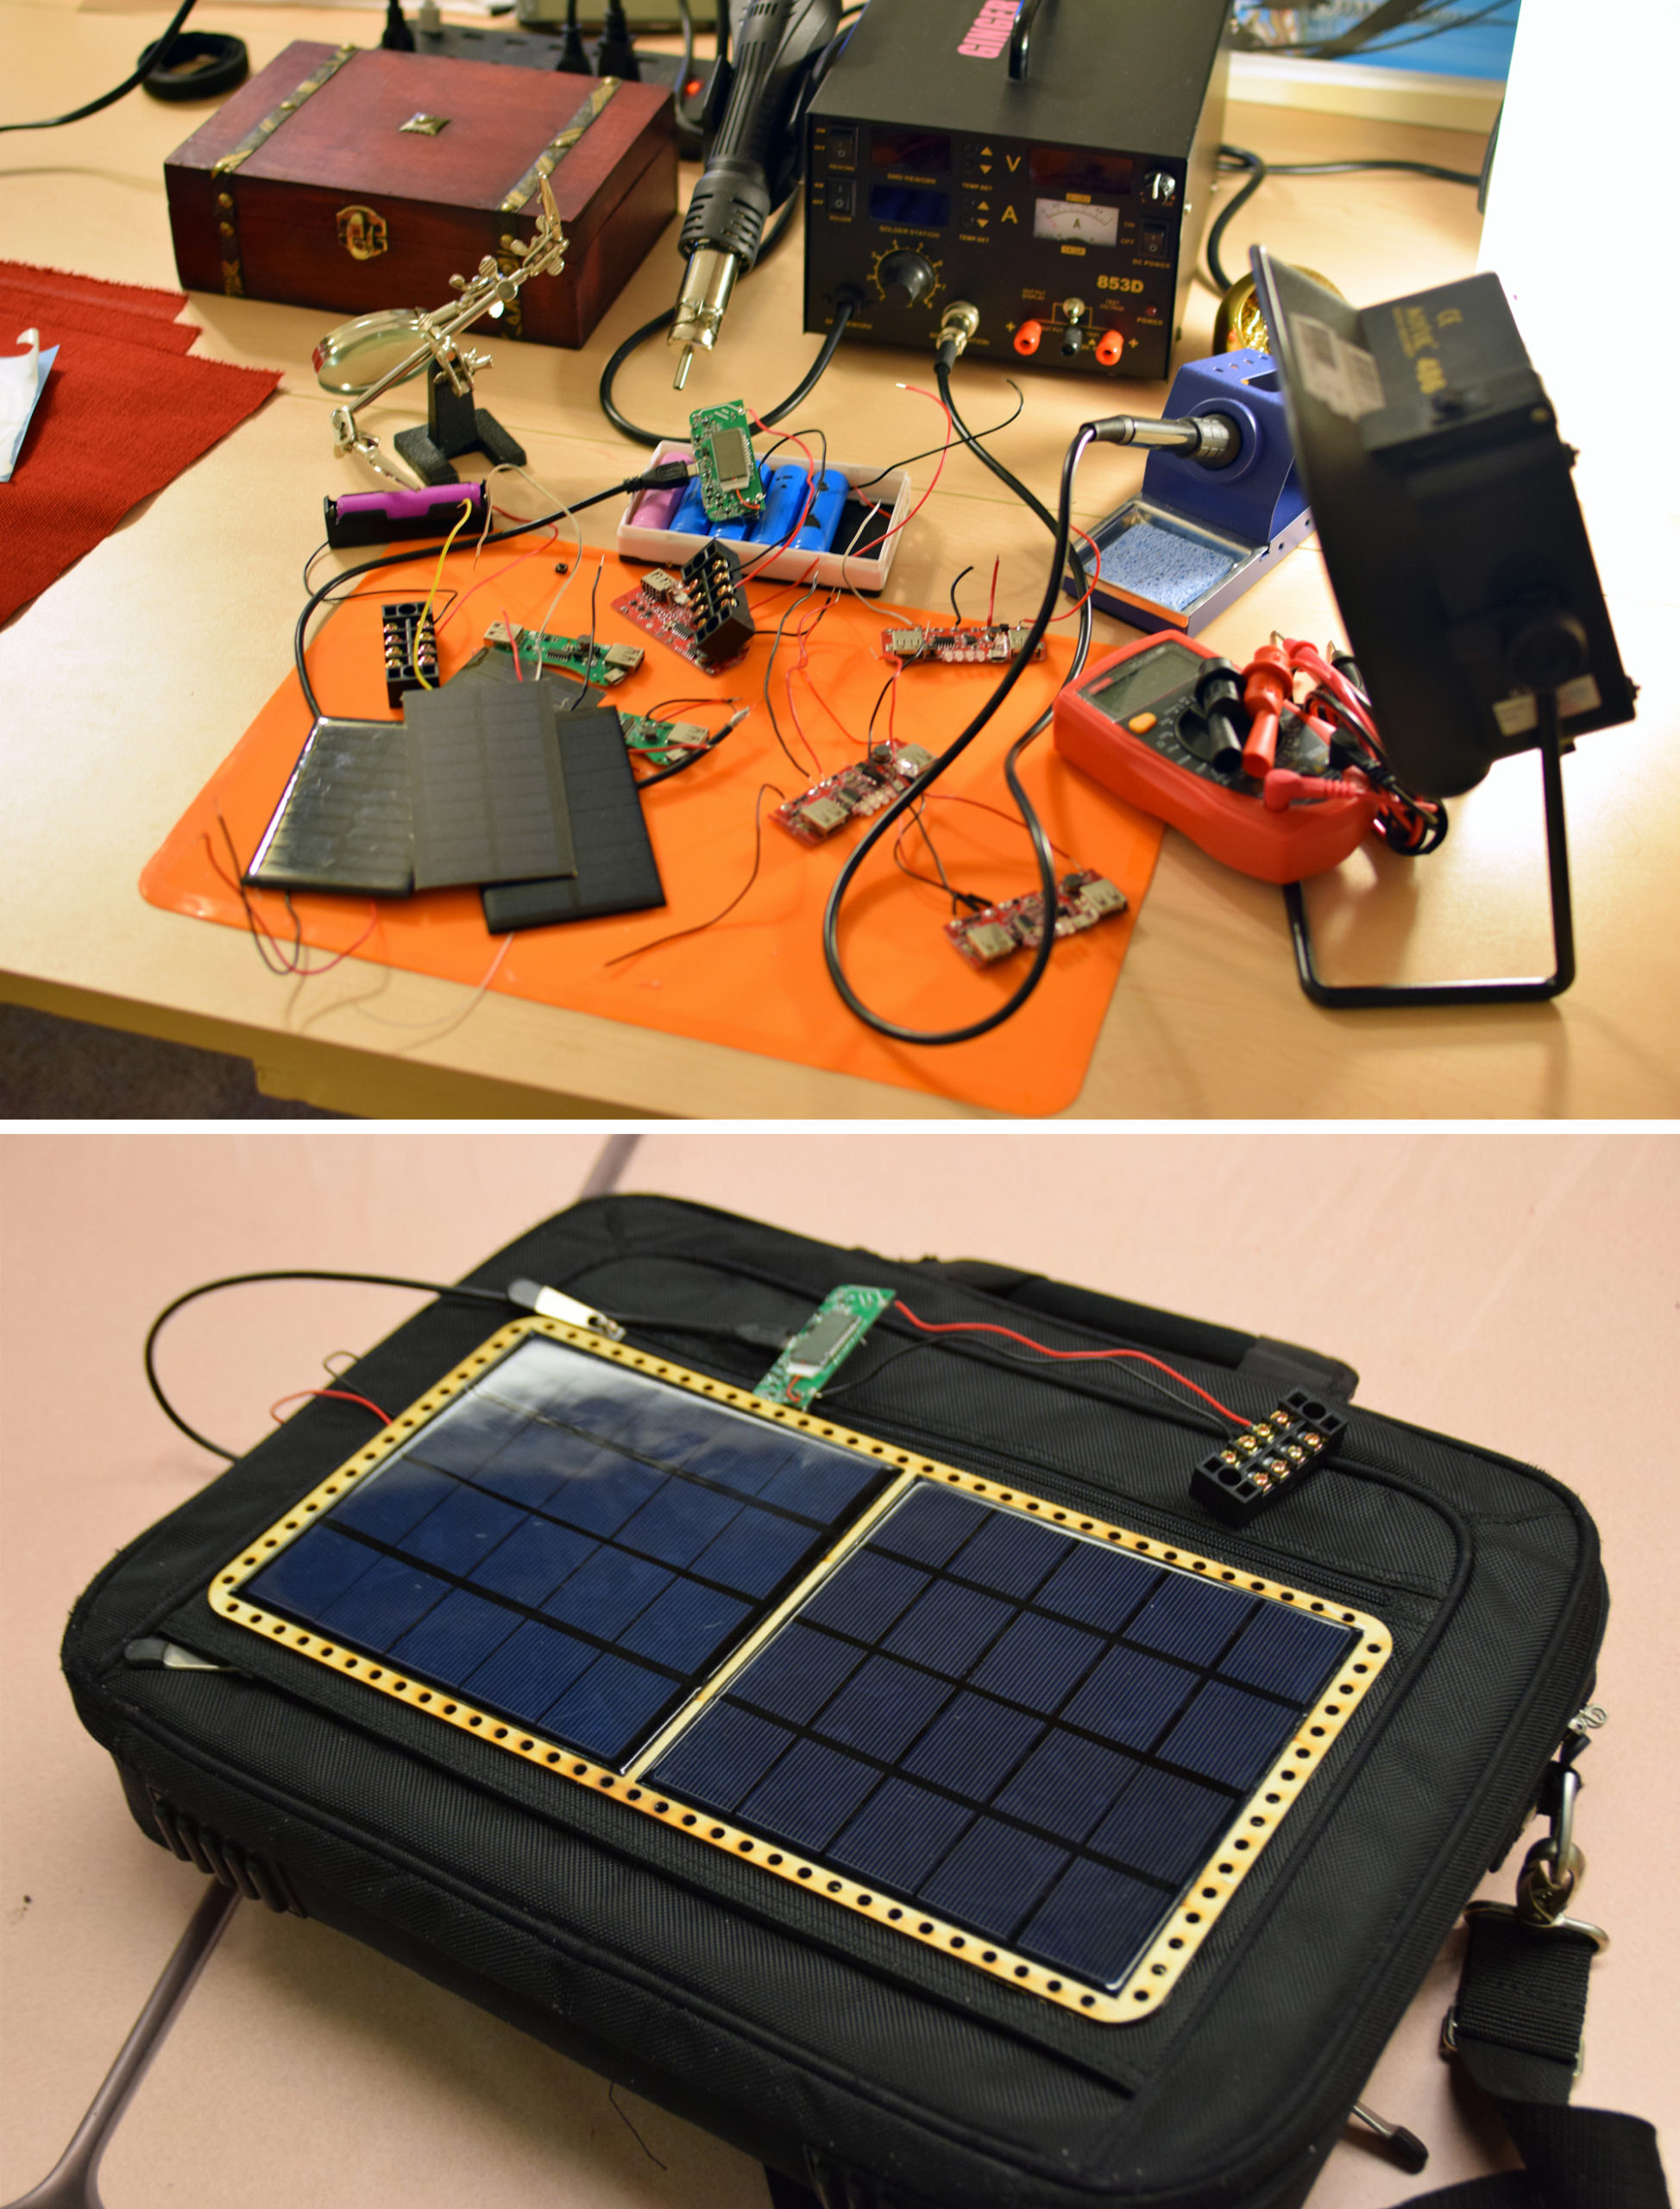 Prototype 1 of the solar panel battery charger laptop bag. I tied in a bank of 18650 cells I harvested from recycled laptop batteries.


